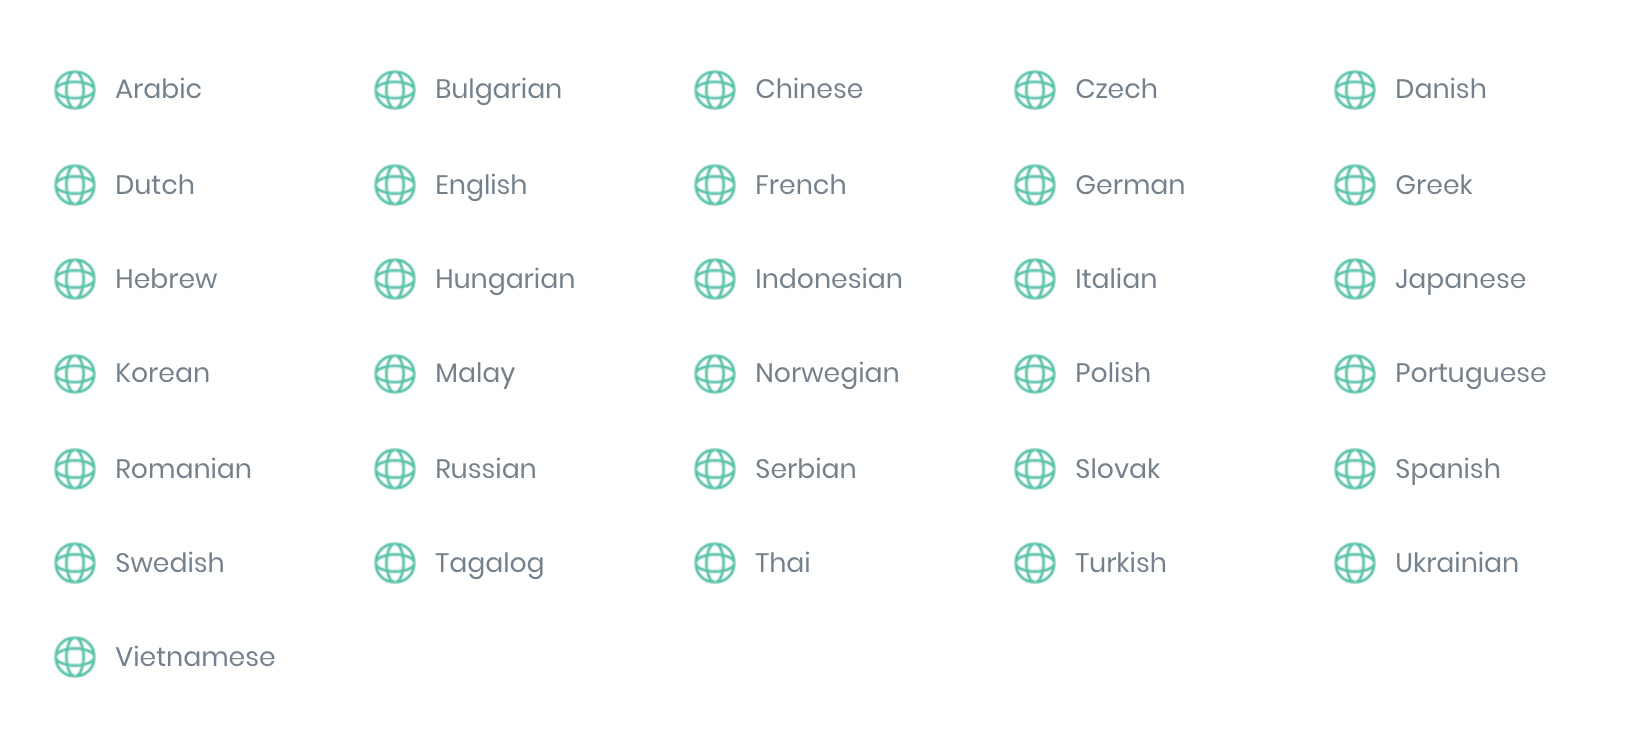 languages available in Divi